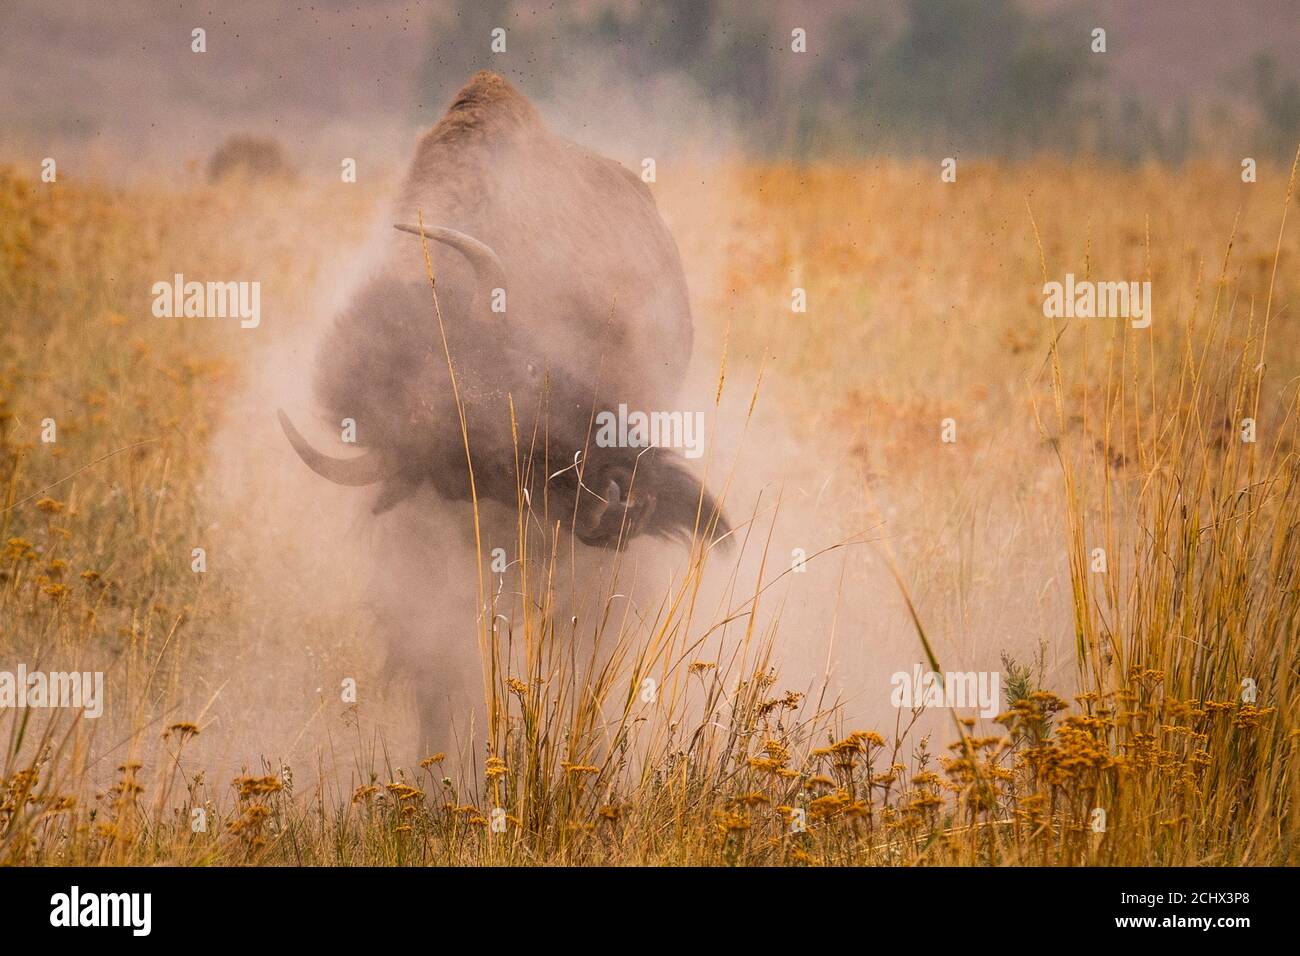 Charlo, Montana, USA. 13th Sep, 2020. A bull bison wallows in the dirt at  The Nation Bison Range which is a National Wildlife Refuge established in  1908 to provide a sanctuary for